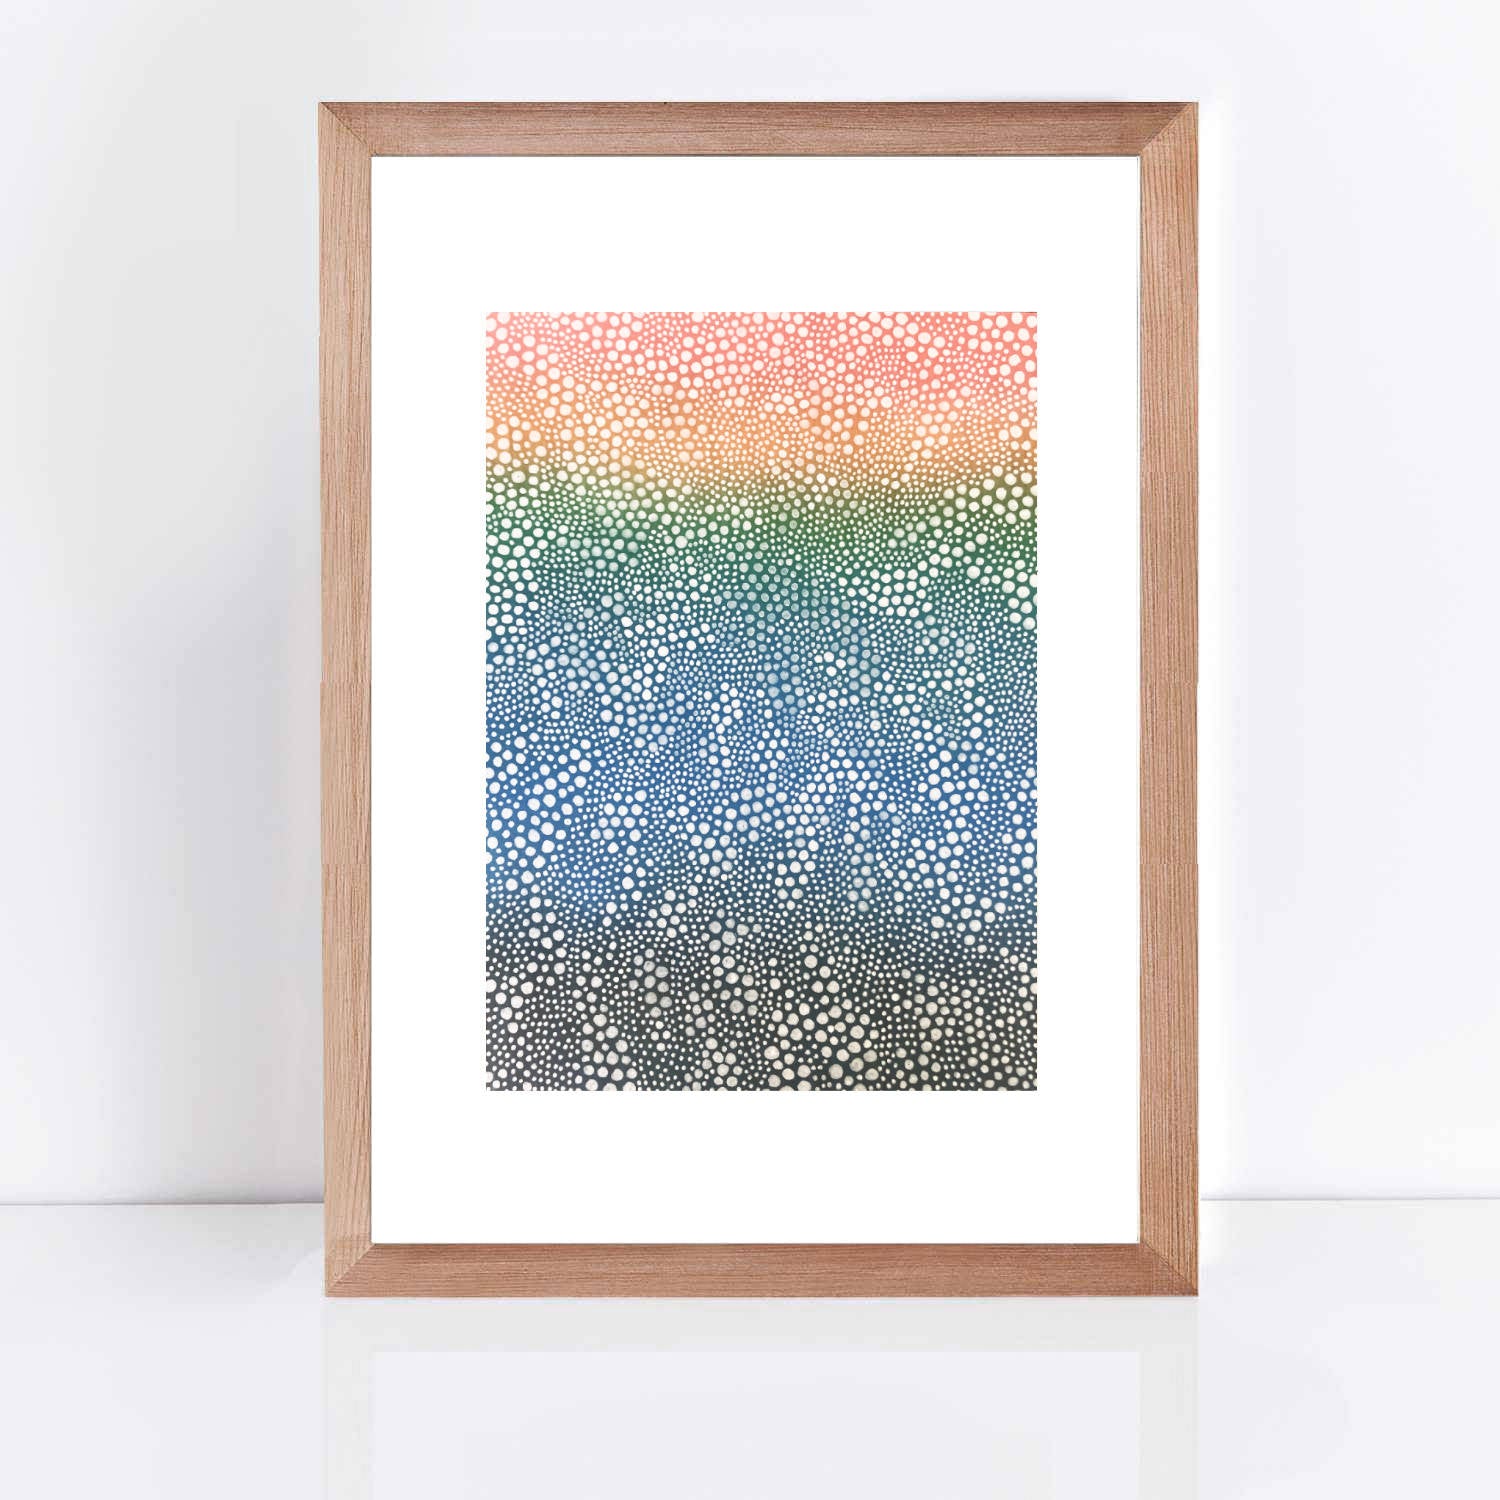 A colourful artwork on paper. Multicoloured background covered in dots.